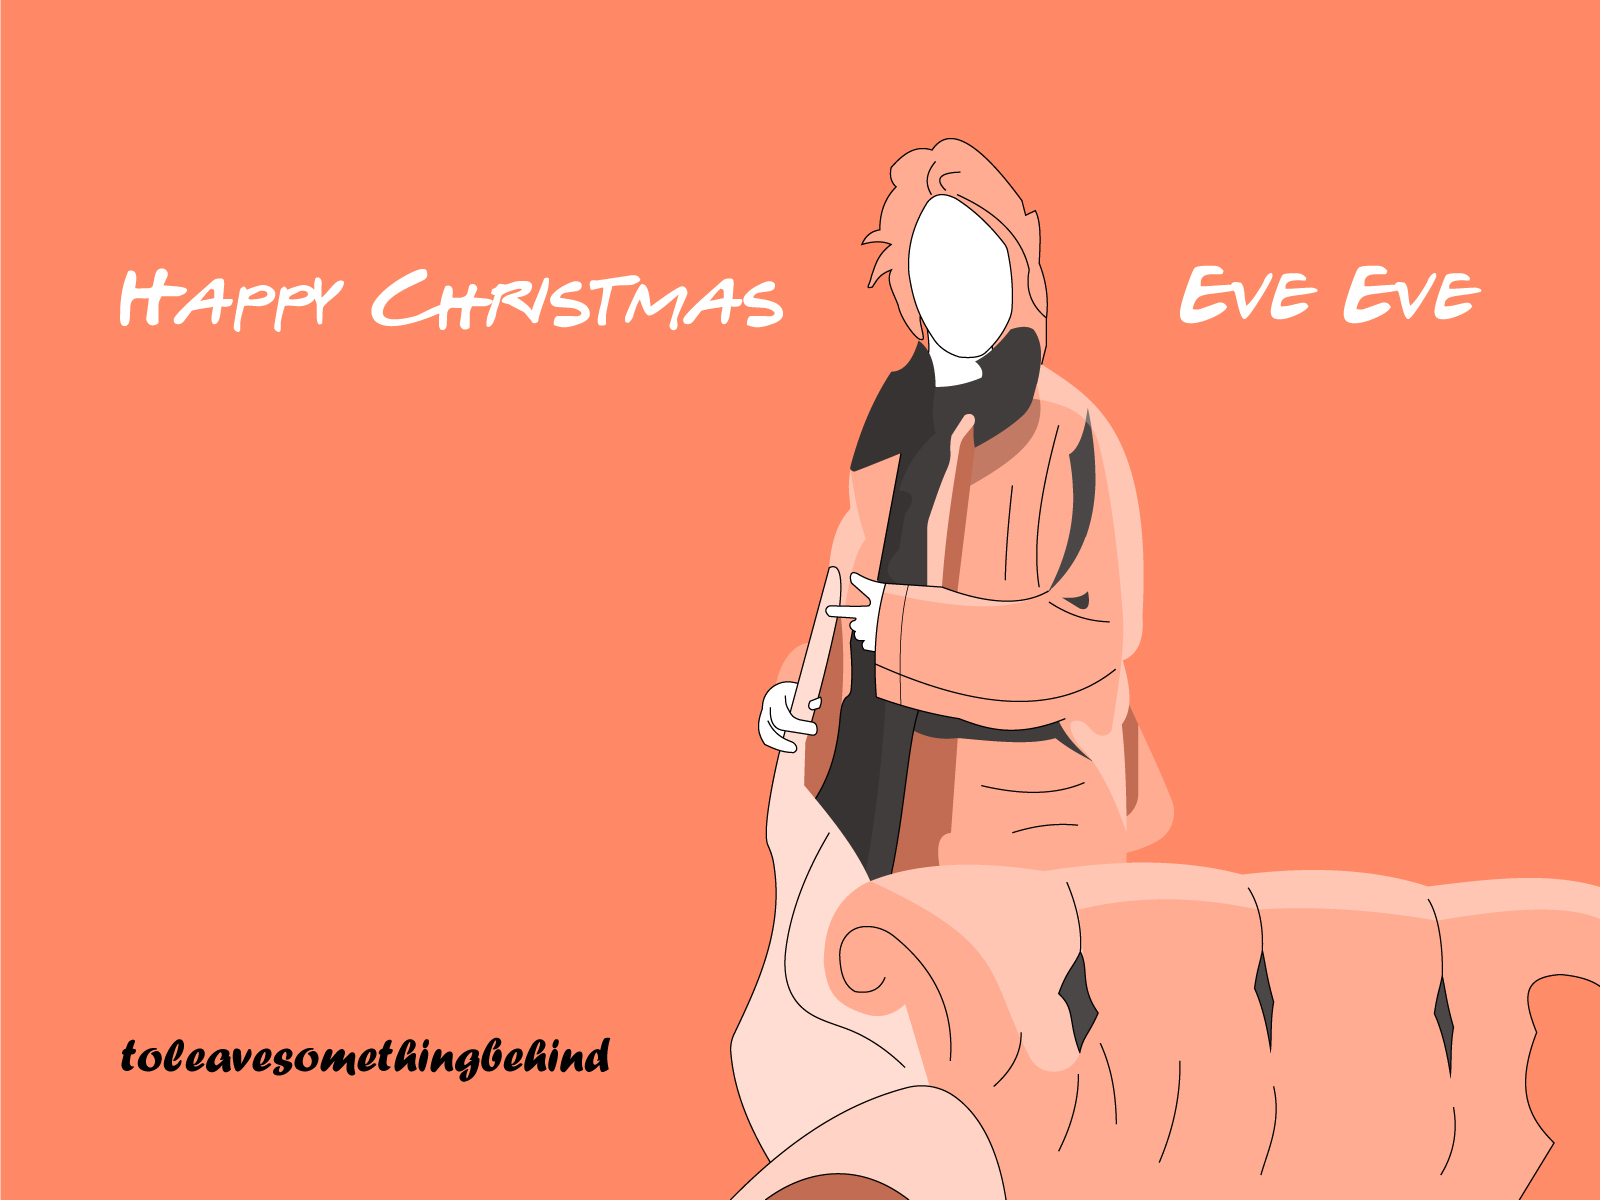 Happy Christmas Eve Eve by ToLeaveSomethingBehind_TLSB on Dribbble